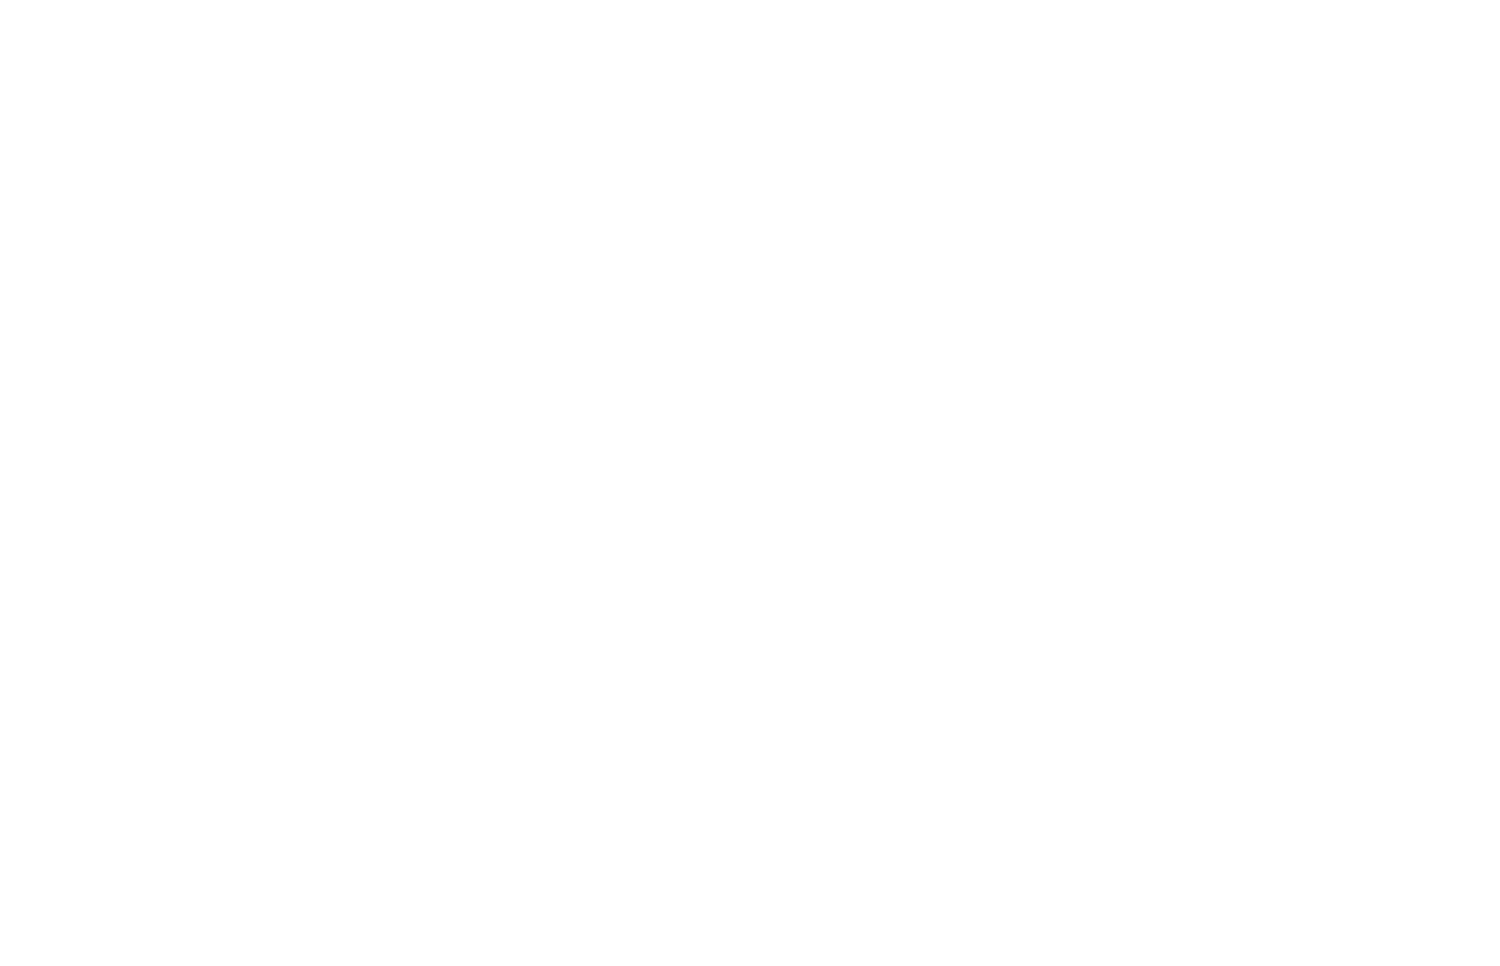 Pixelcouture Paperie